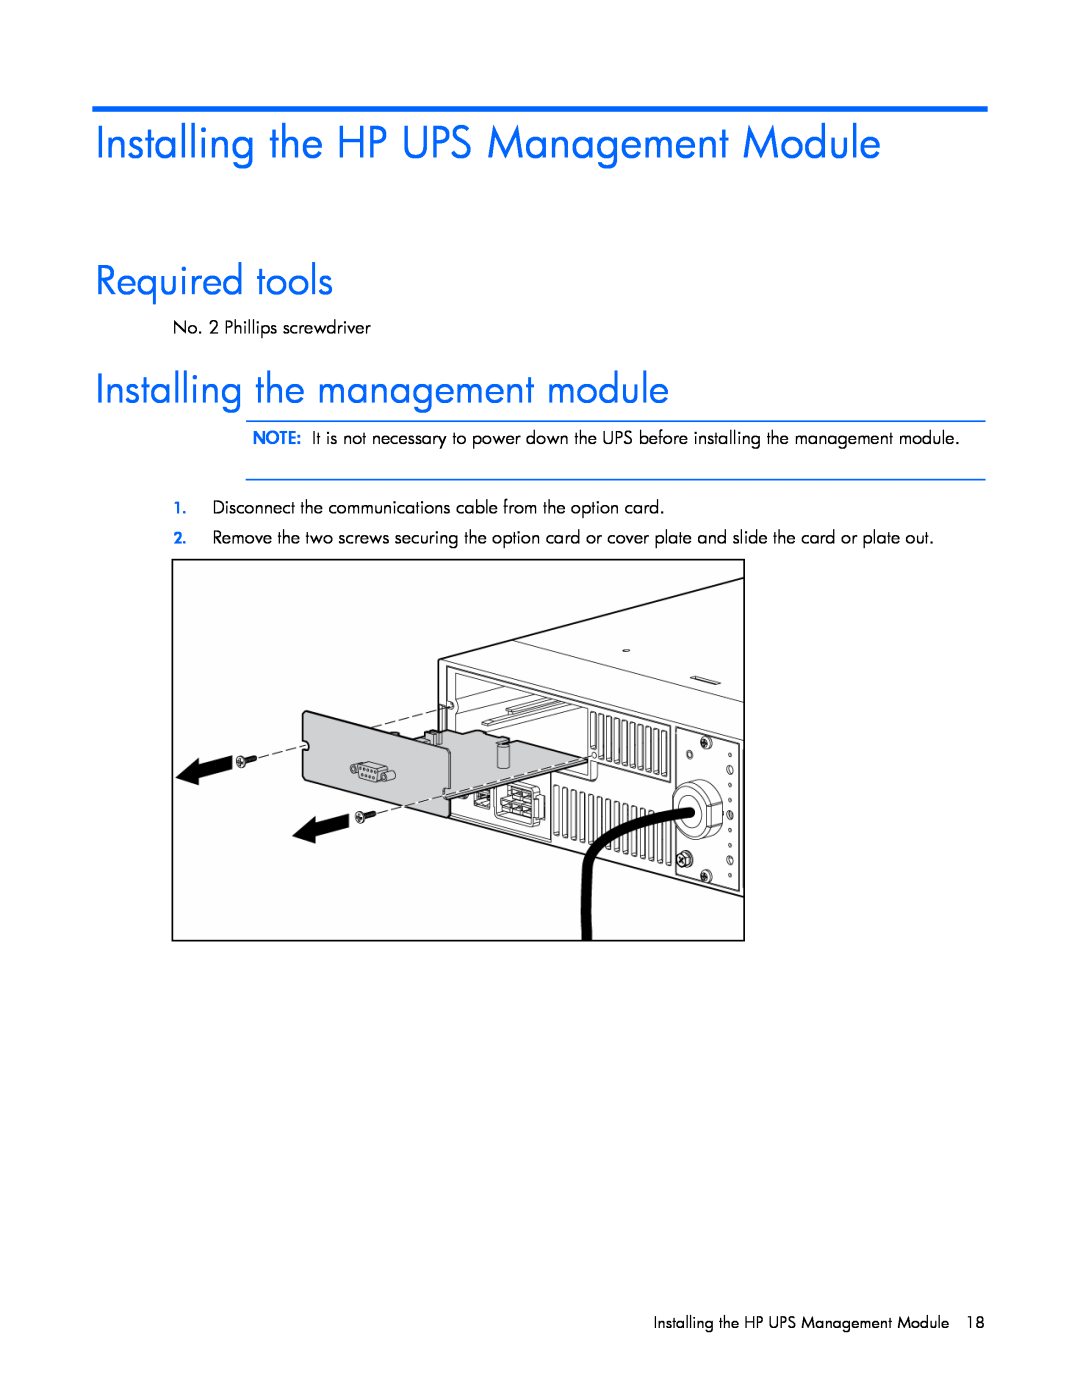 HP J4373A, A6584A, A1354A, A1353A Installing the HP UPS Management Module, Required tools, Installing the management module 